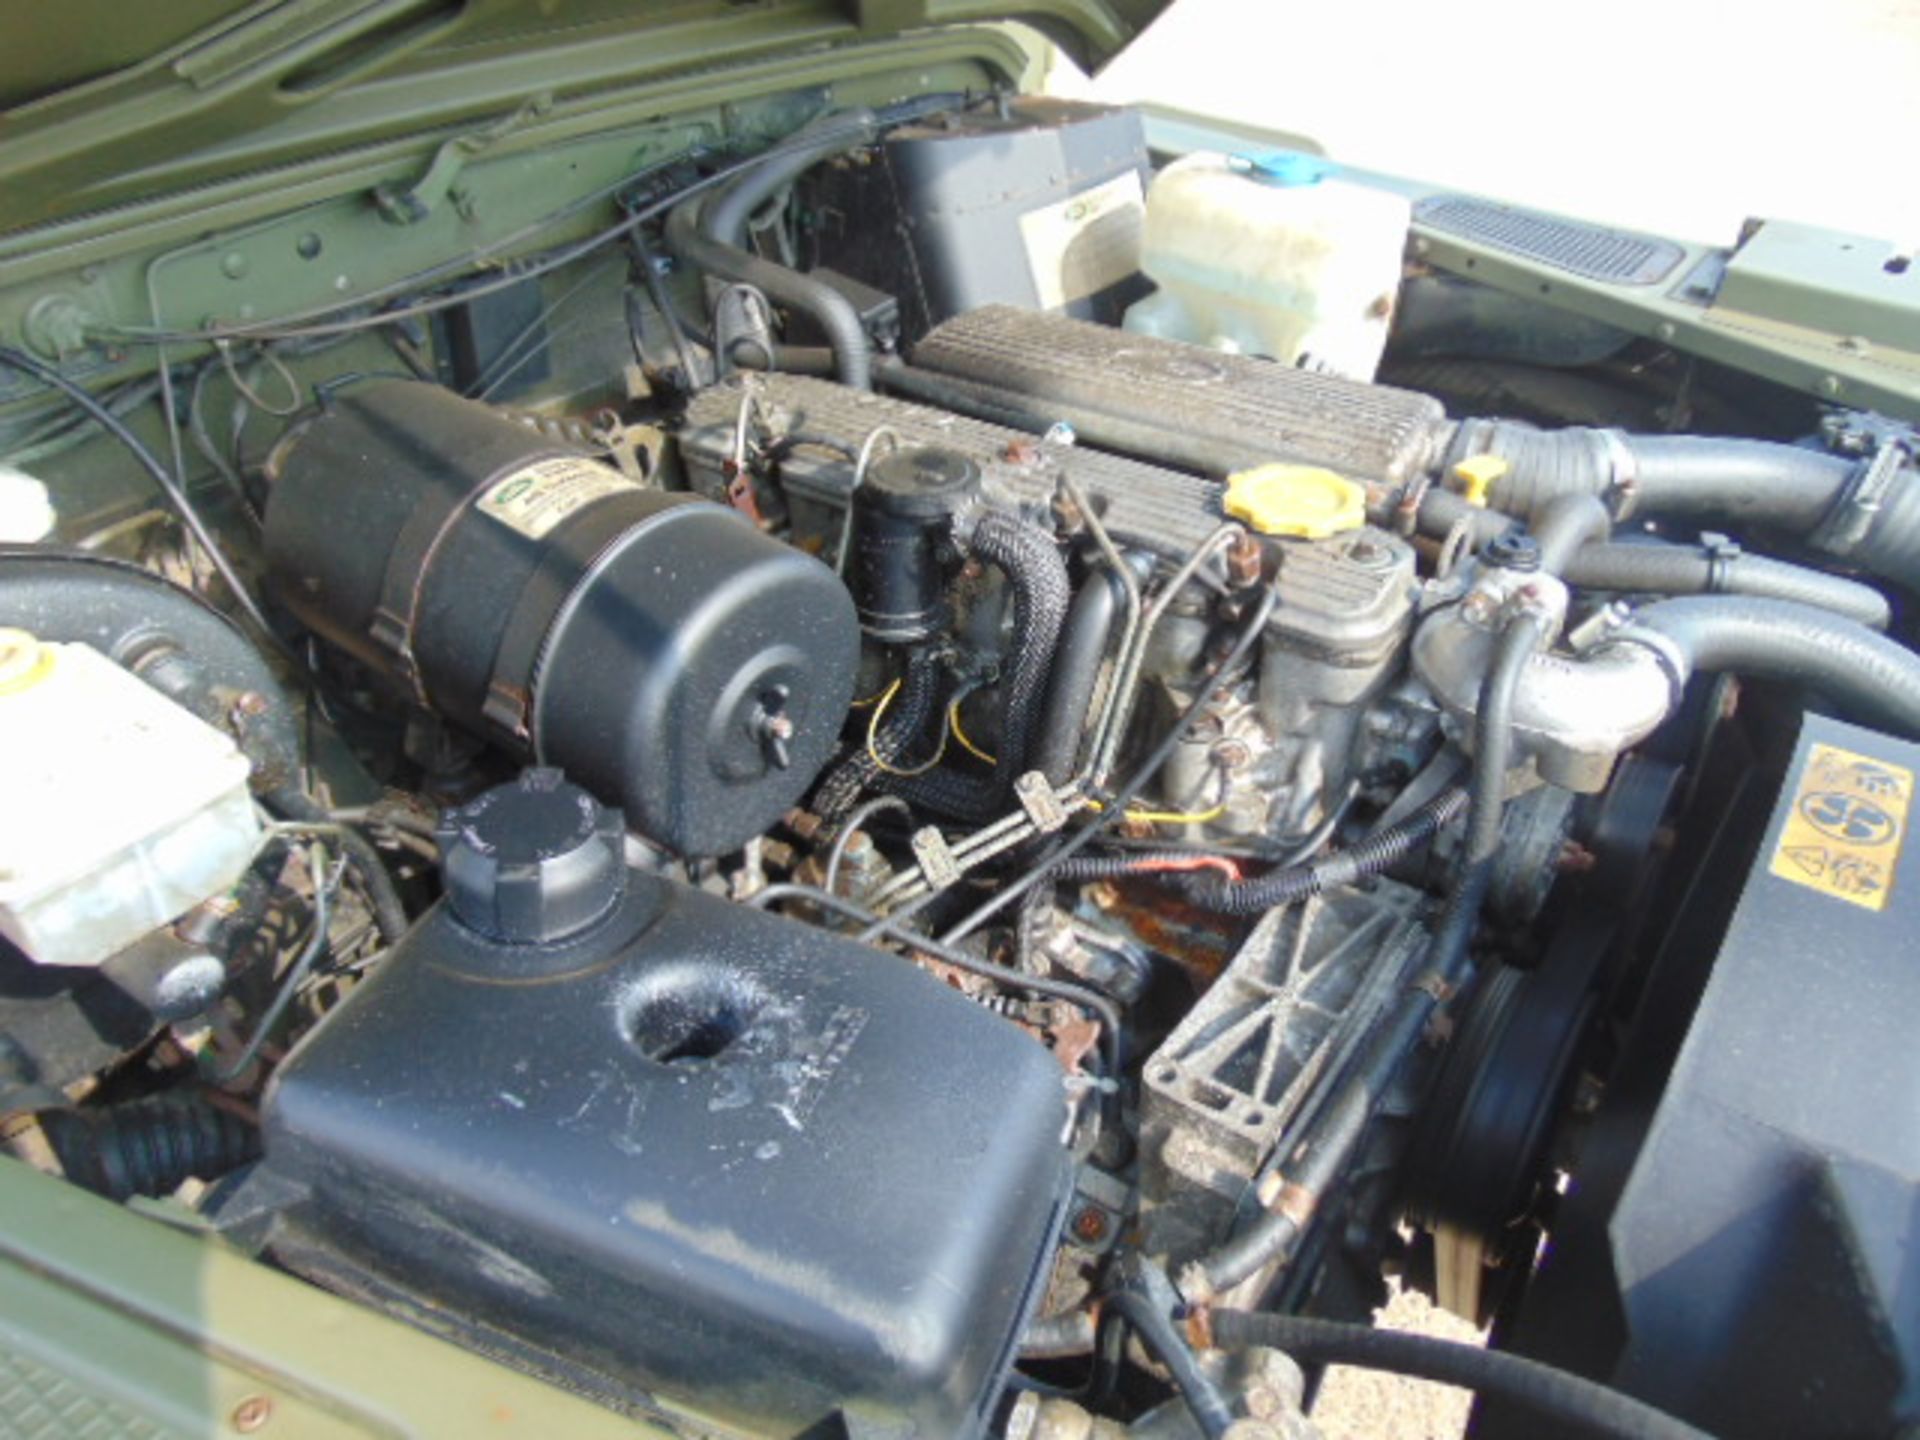 Military Specification Land Rover Wolf 90 Soft Top - Image 17 of 26